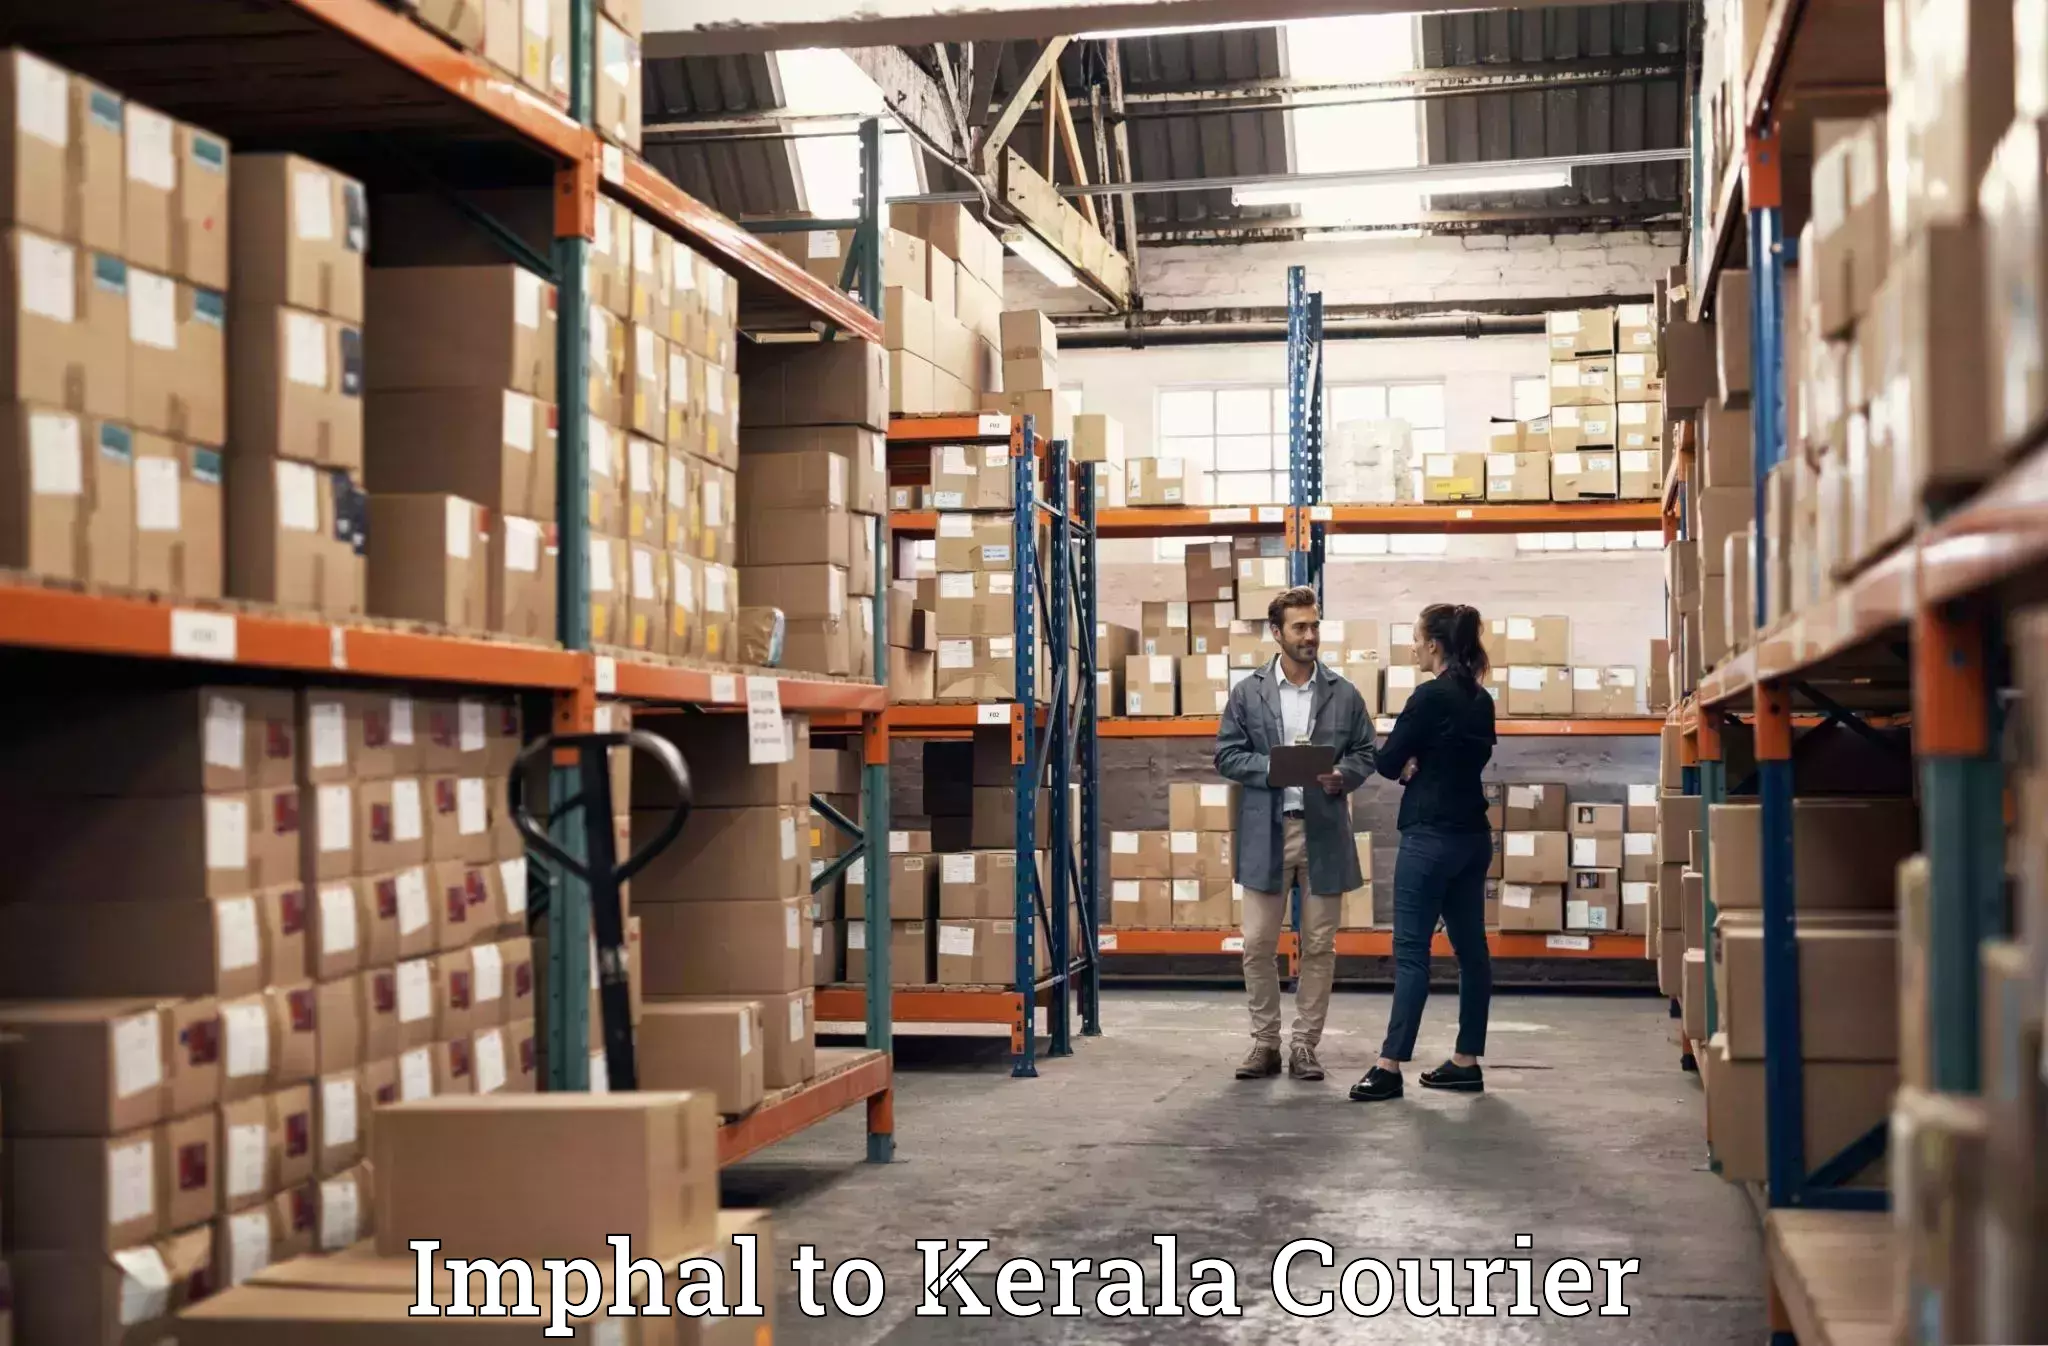 Luggage transport consulting Imphal to Kerala